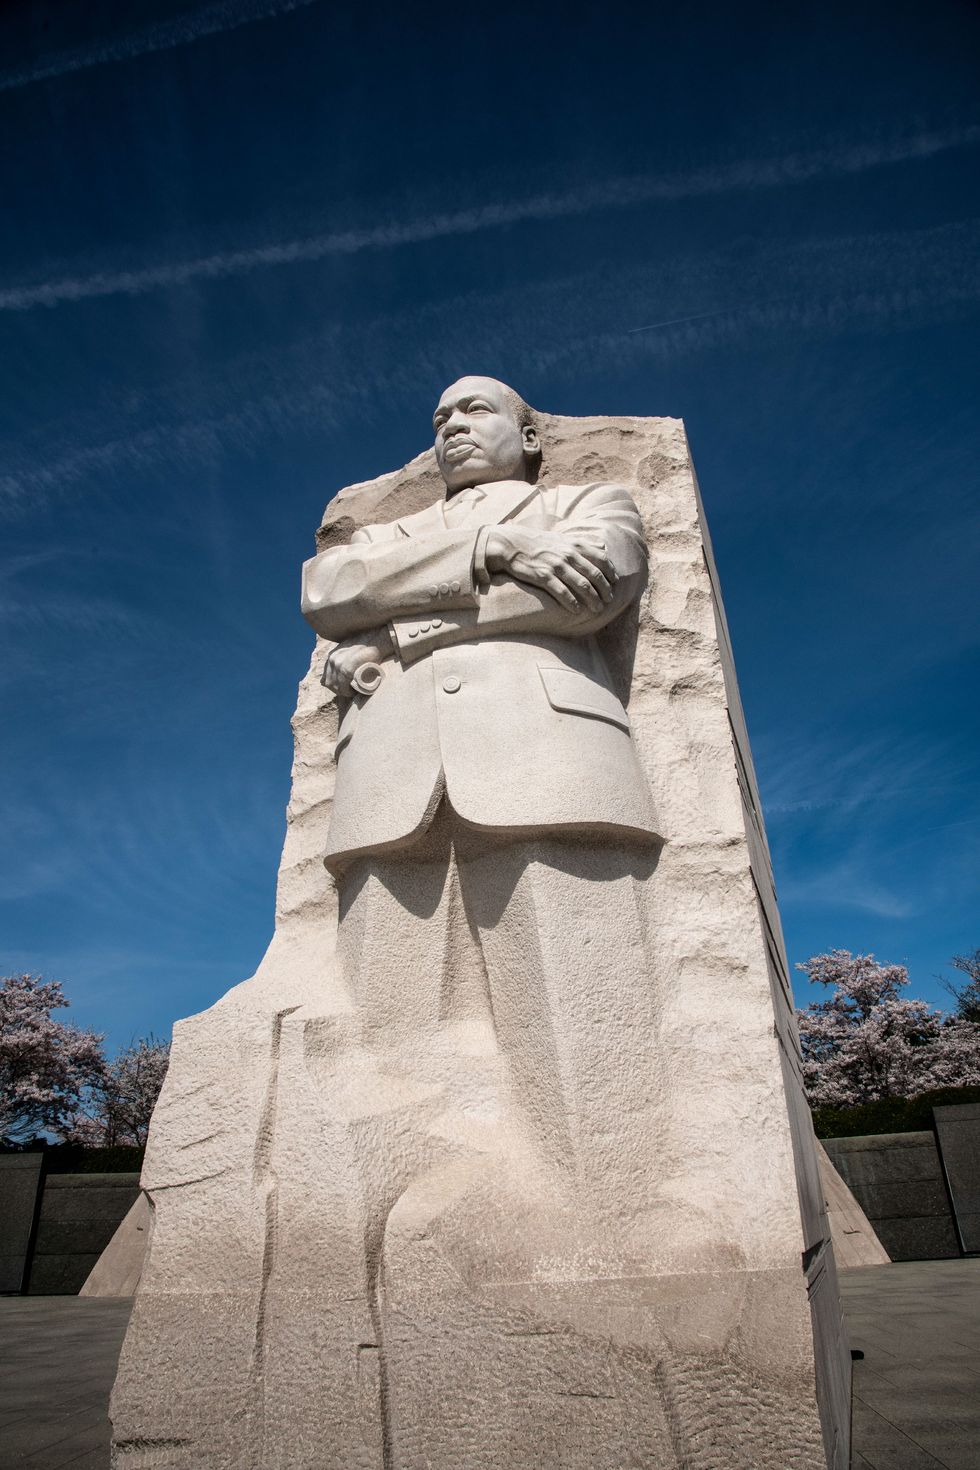 martin luther king memorial on the national mall, washington, dc photo by robert knopeseducation imagesuniversal images group via getty images